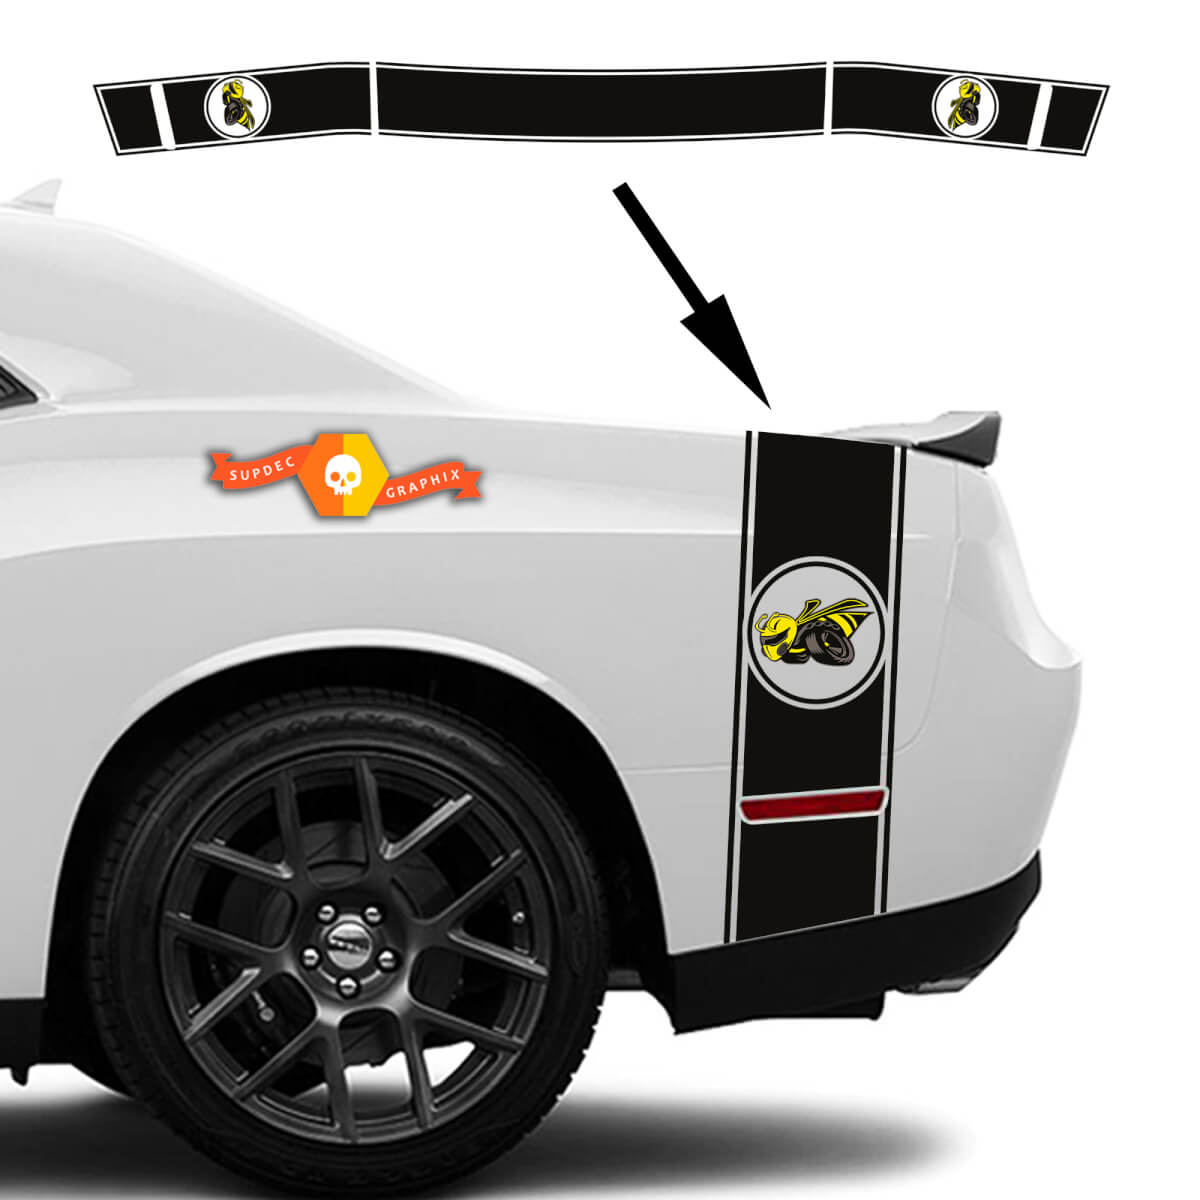 Kit Dodge Challenger oder Charger Drag Bee Tail Bed Rear Stripe Decal Kit Kofferraum 3
